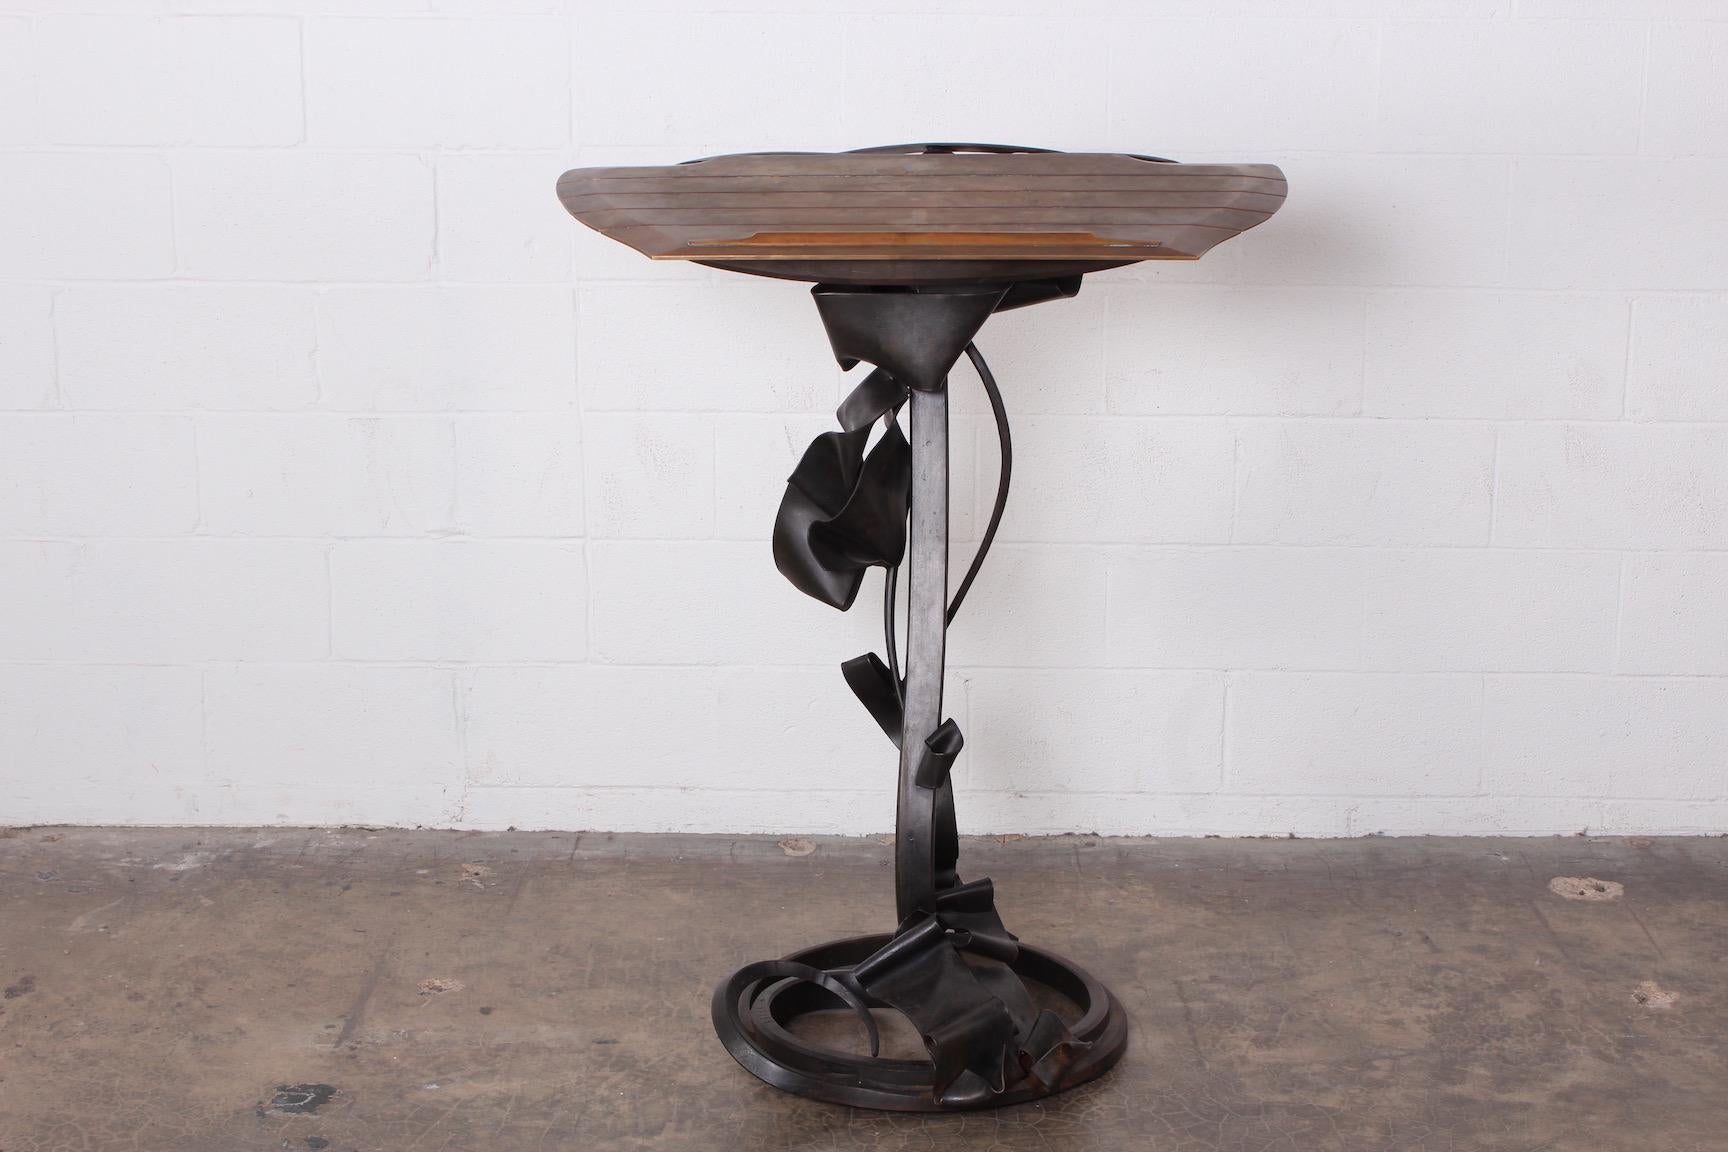 A bronze and forged steel lectern by Albert Paley signed and dated 1990.